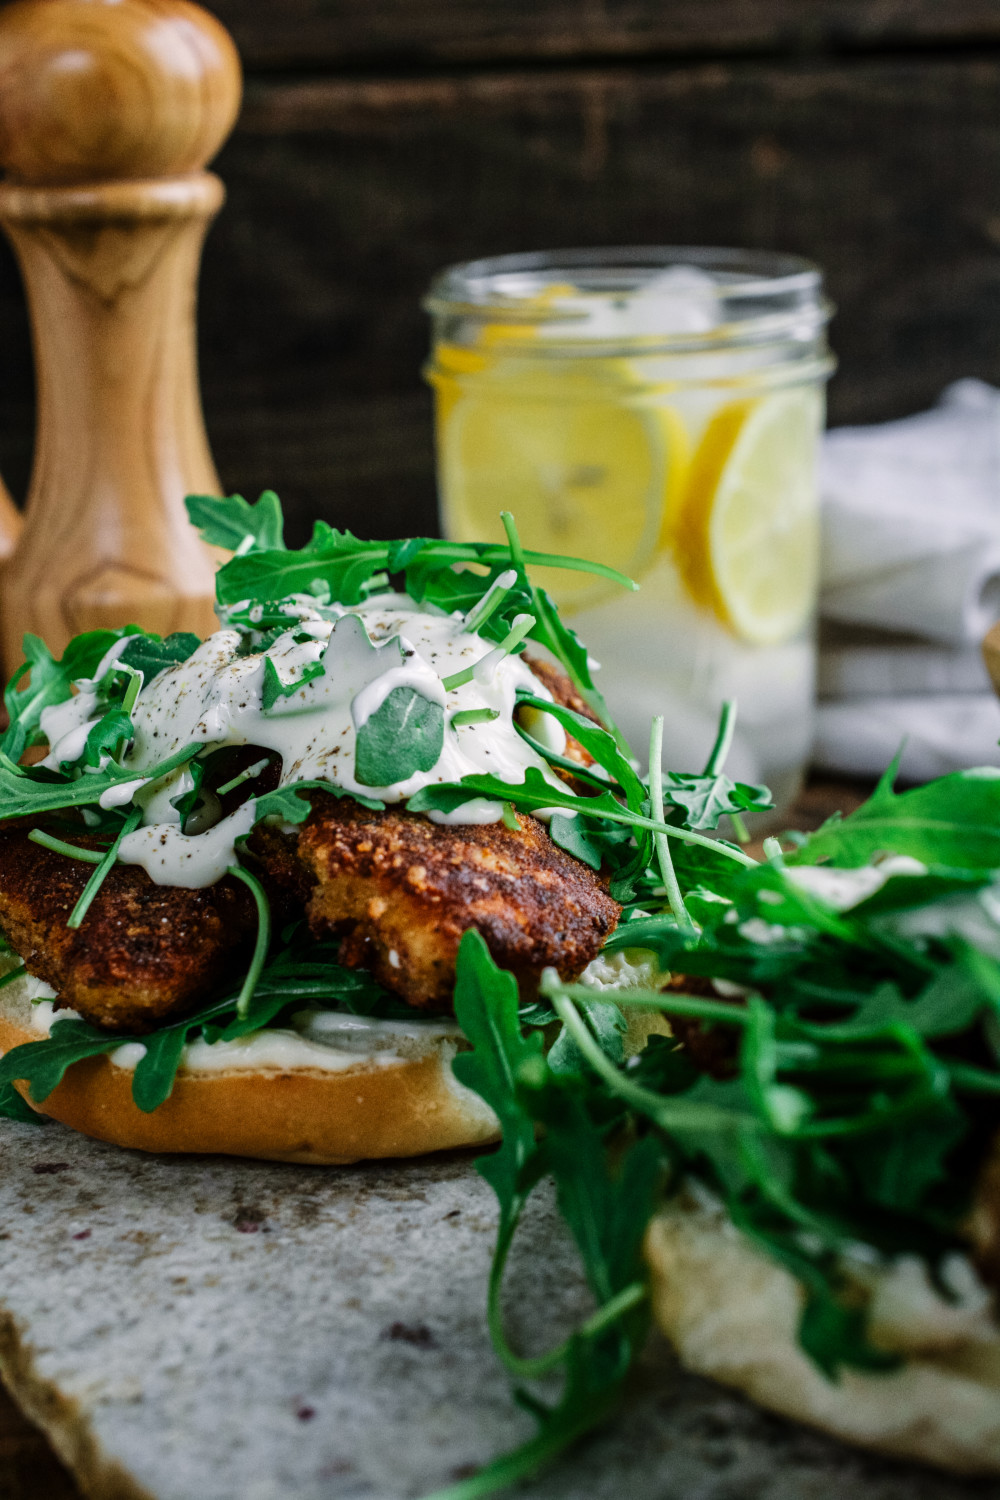 This Chicken Cutlet with Lemon Mayonnaise and Arugula Sandwich is the ultimate in flavor and crunch! ciaochowbambina.com #chickencutlet #chickensandwich #cutletsandwich #italianfood #ciaochowbambina